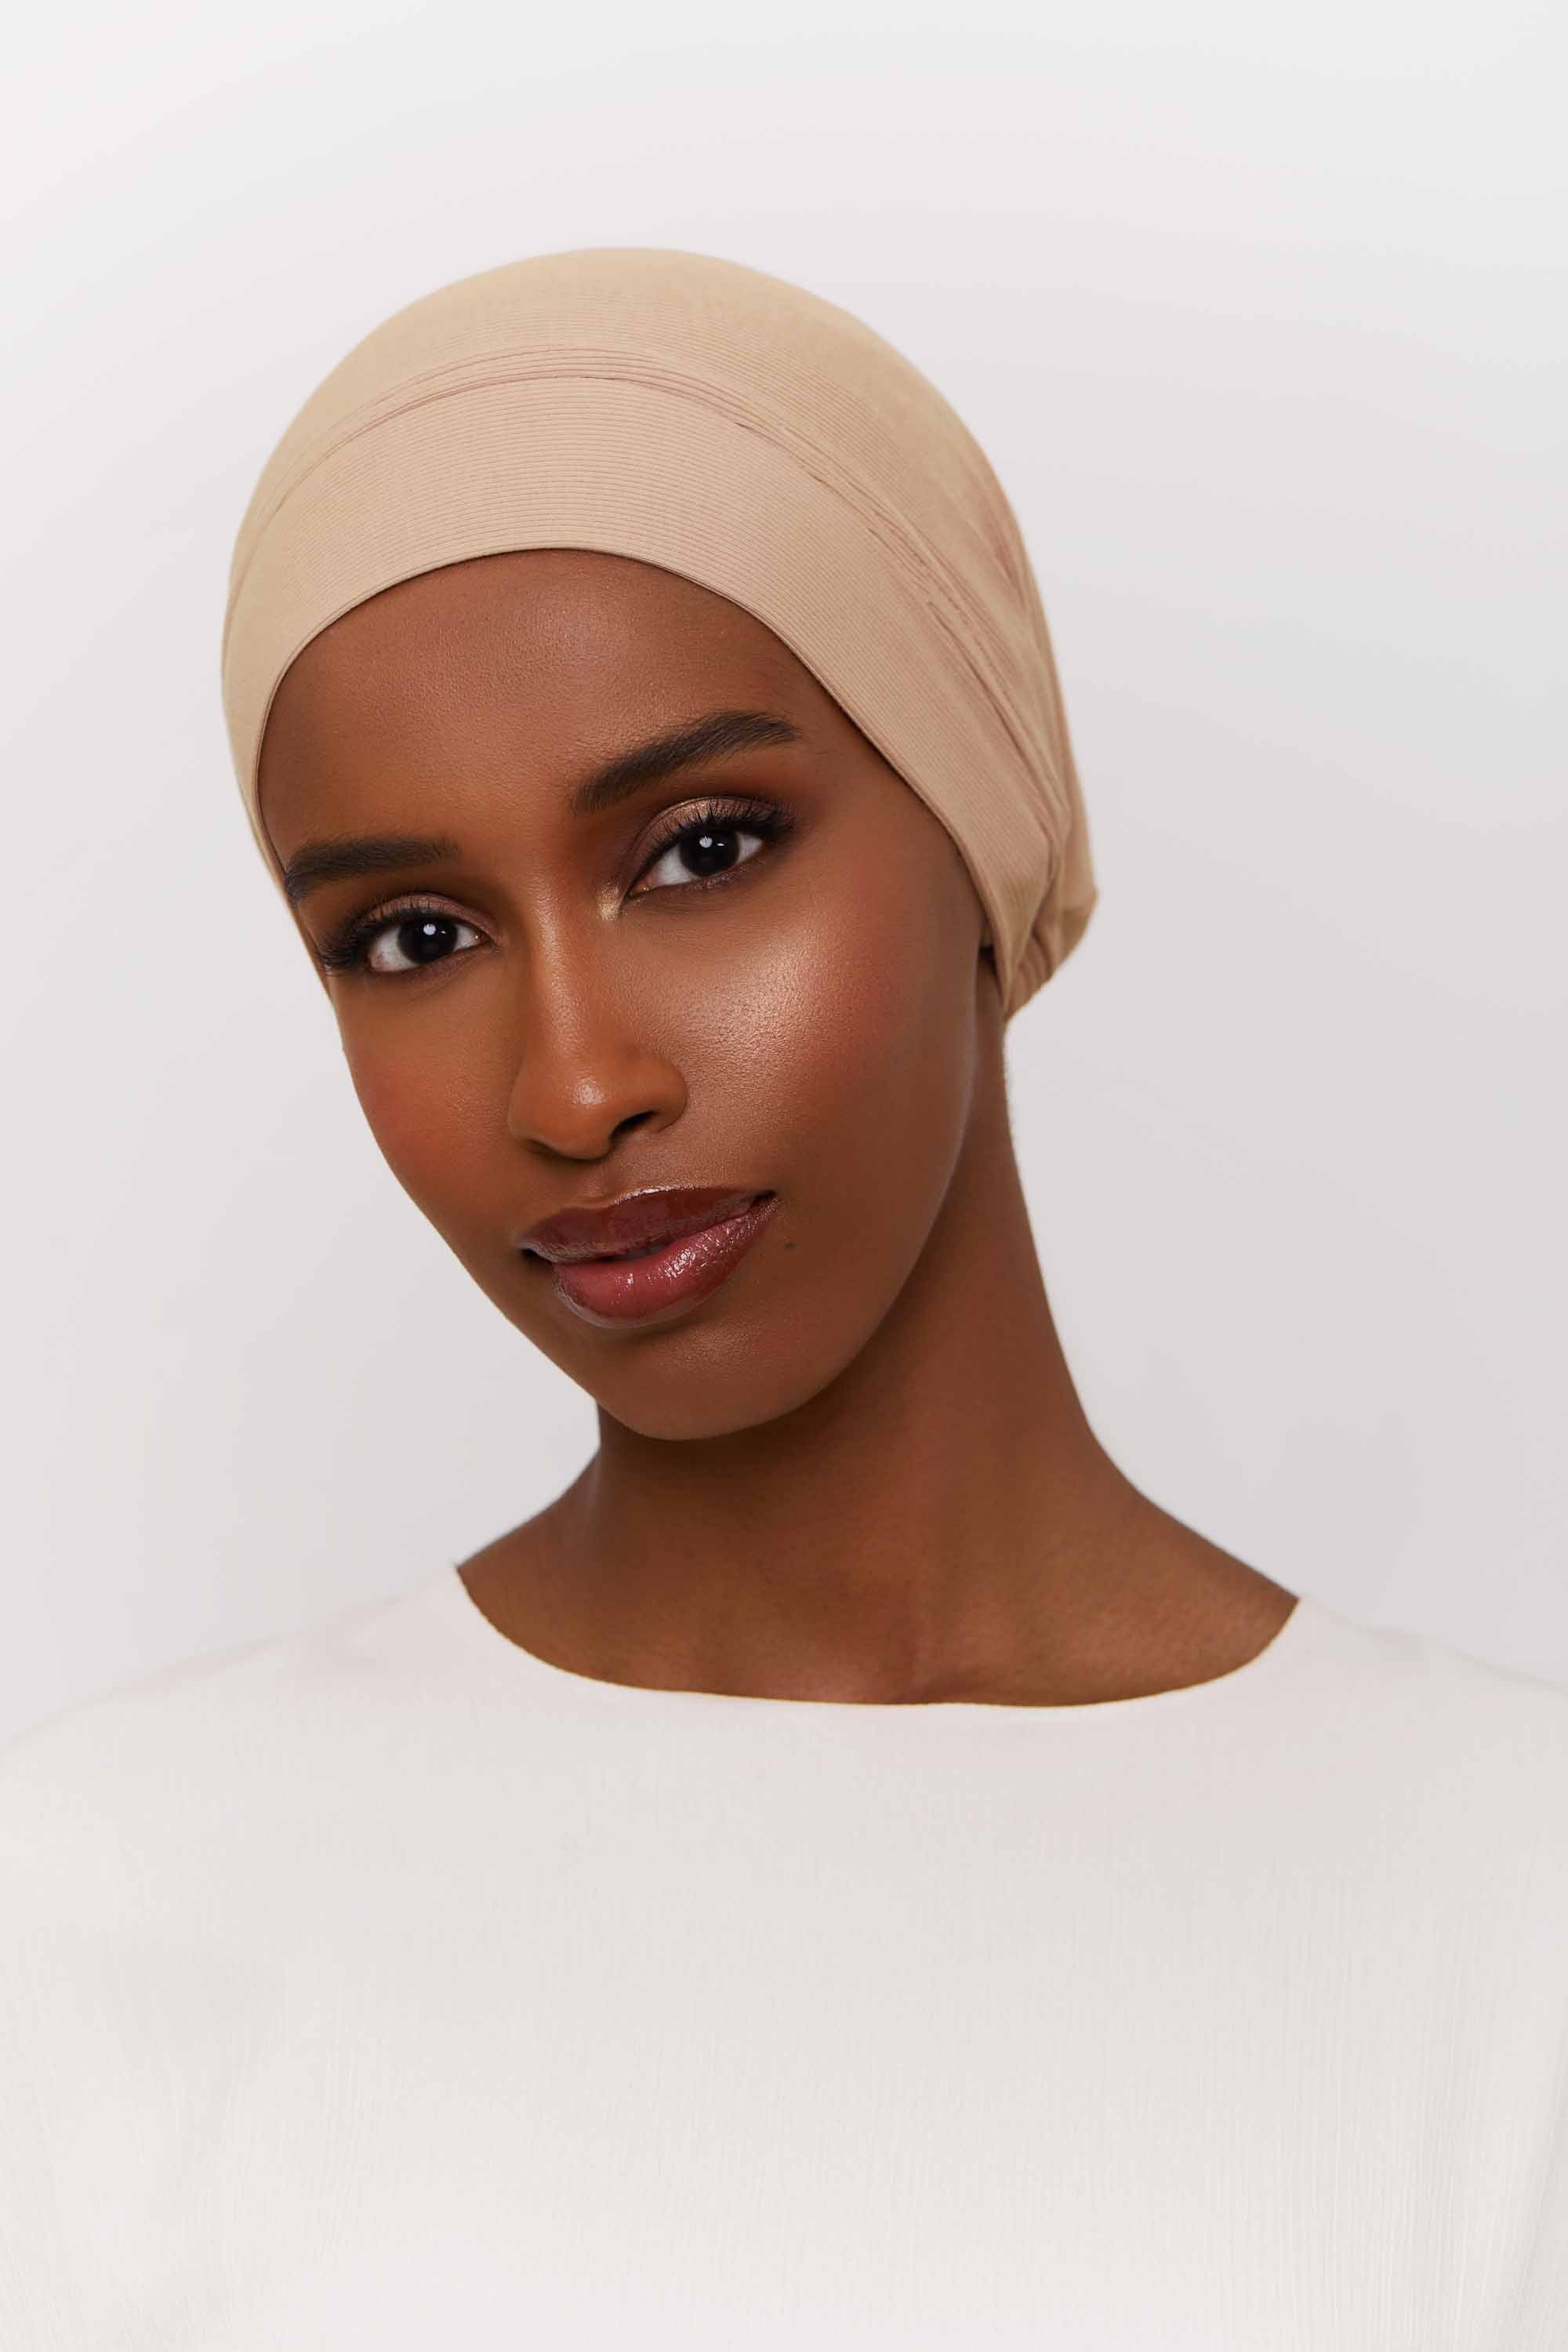 Ribbed Tie Back Undercap - Light Natural Extra Small Accessories Veiled 